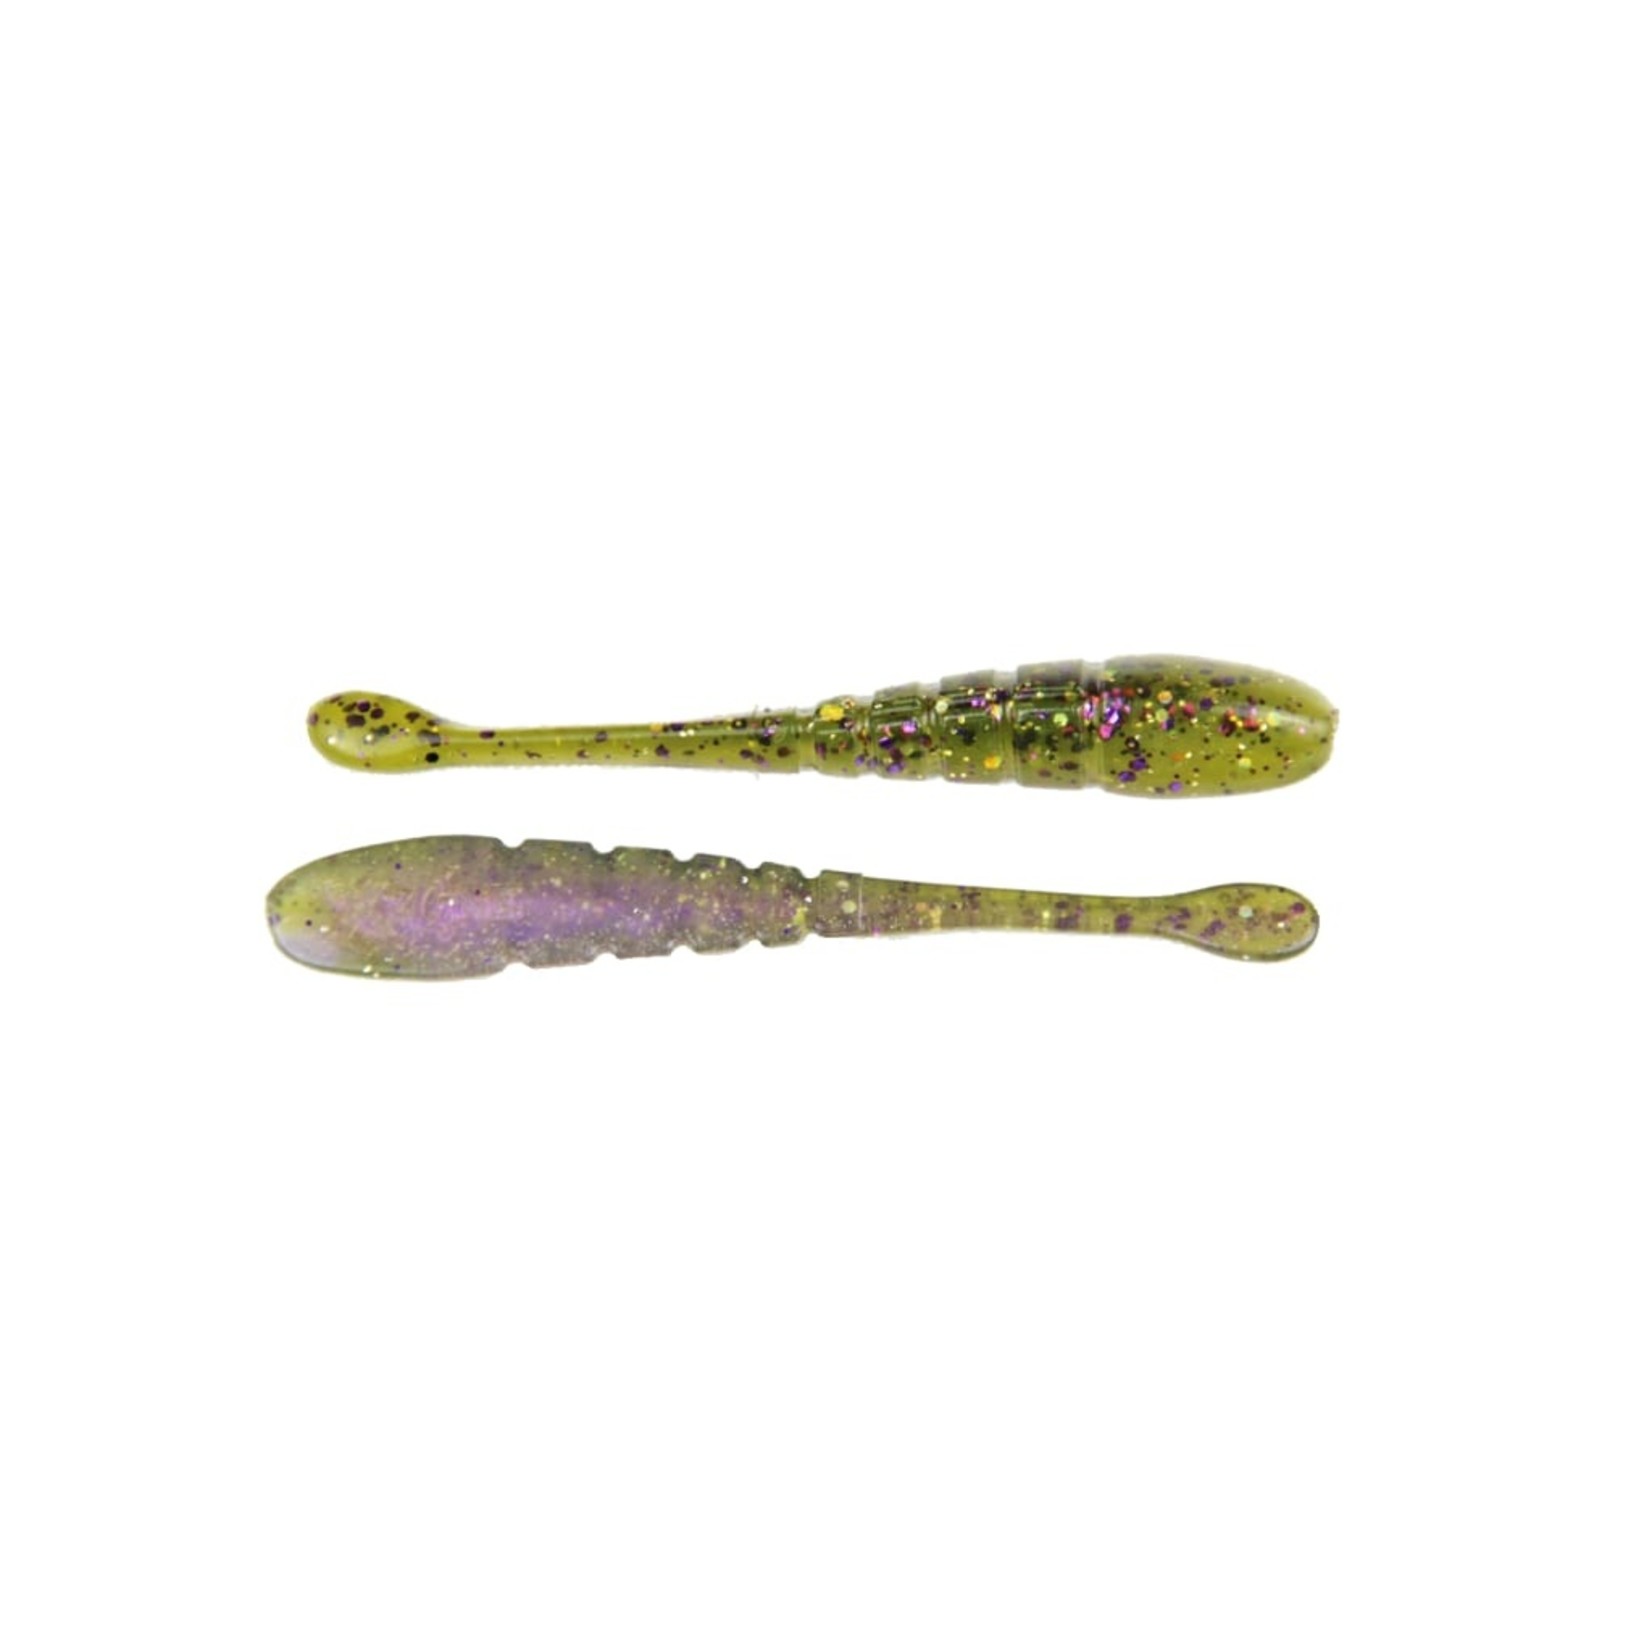 X Zone Lures X Zone Lures 4" Pro Series Slammer